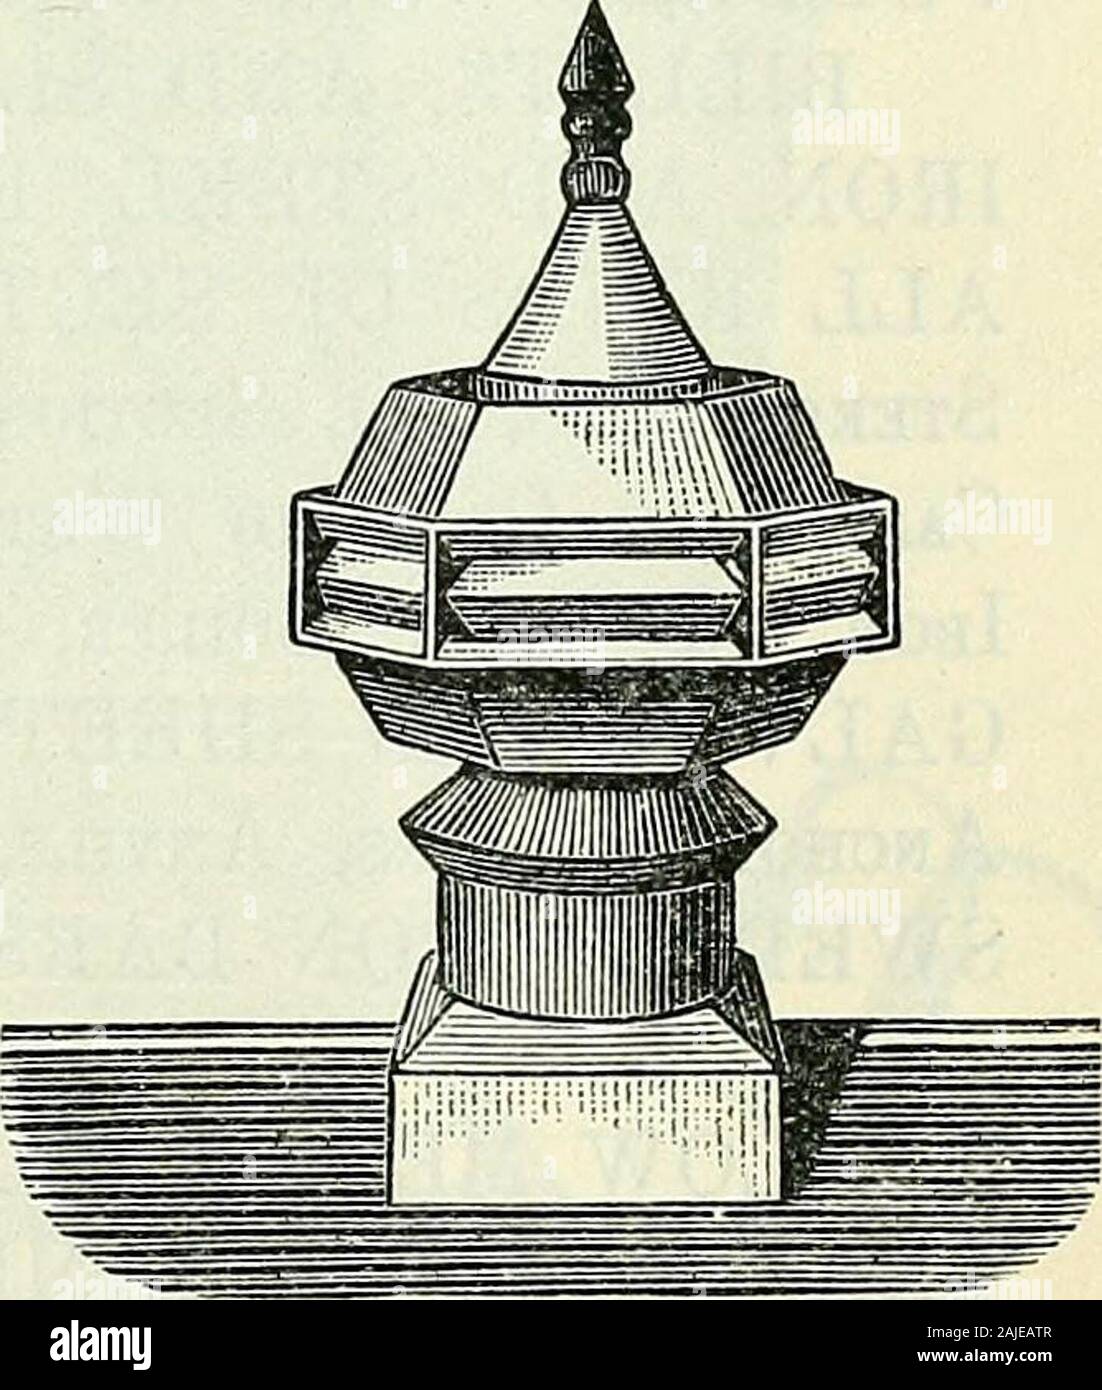 The Post-Office annual Glasgow directory . STREET LAMPS IN COPPER, TIN, AND ZINC. SPECIAL LAMPS FOR ELECTRIC LIGHT. Price Lists on ApplicatioD.. MUNNSPatent Ventilators. Designs, Prices, &c., onApplication. SOLE MANUFACTURERS. JAMES G. CARRICK & CO., SMITHS, GASFITTERS, VENTILATING ENGINEERS, SHEET-METAL WORKERS, AND MANUFACTURERS OF METALLIC CASKS, KEGS, LEVER-TOP & SLIP-LID TINS FOR PAINT, SOAP, GREASE, &c., PRINTERS AND DECORATORS ON TiNPLATE AND OTHER MATERIALS. 23 NORTH WALLACE STREET. PARLIAMENTARY ROAD, GLASGOW. 222 ADVERTISEMENTS. A. G. KIDSTON & CO., 81 GREAT CLYDE STREET, GLASGOW,AND Stock Photo